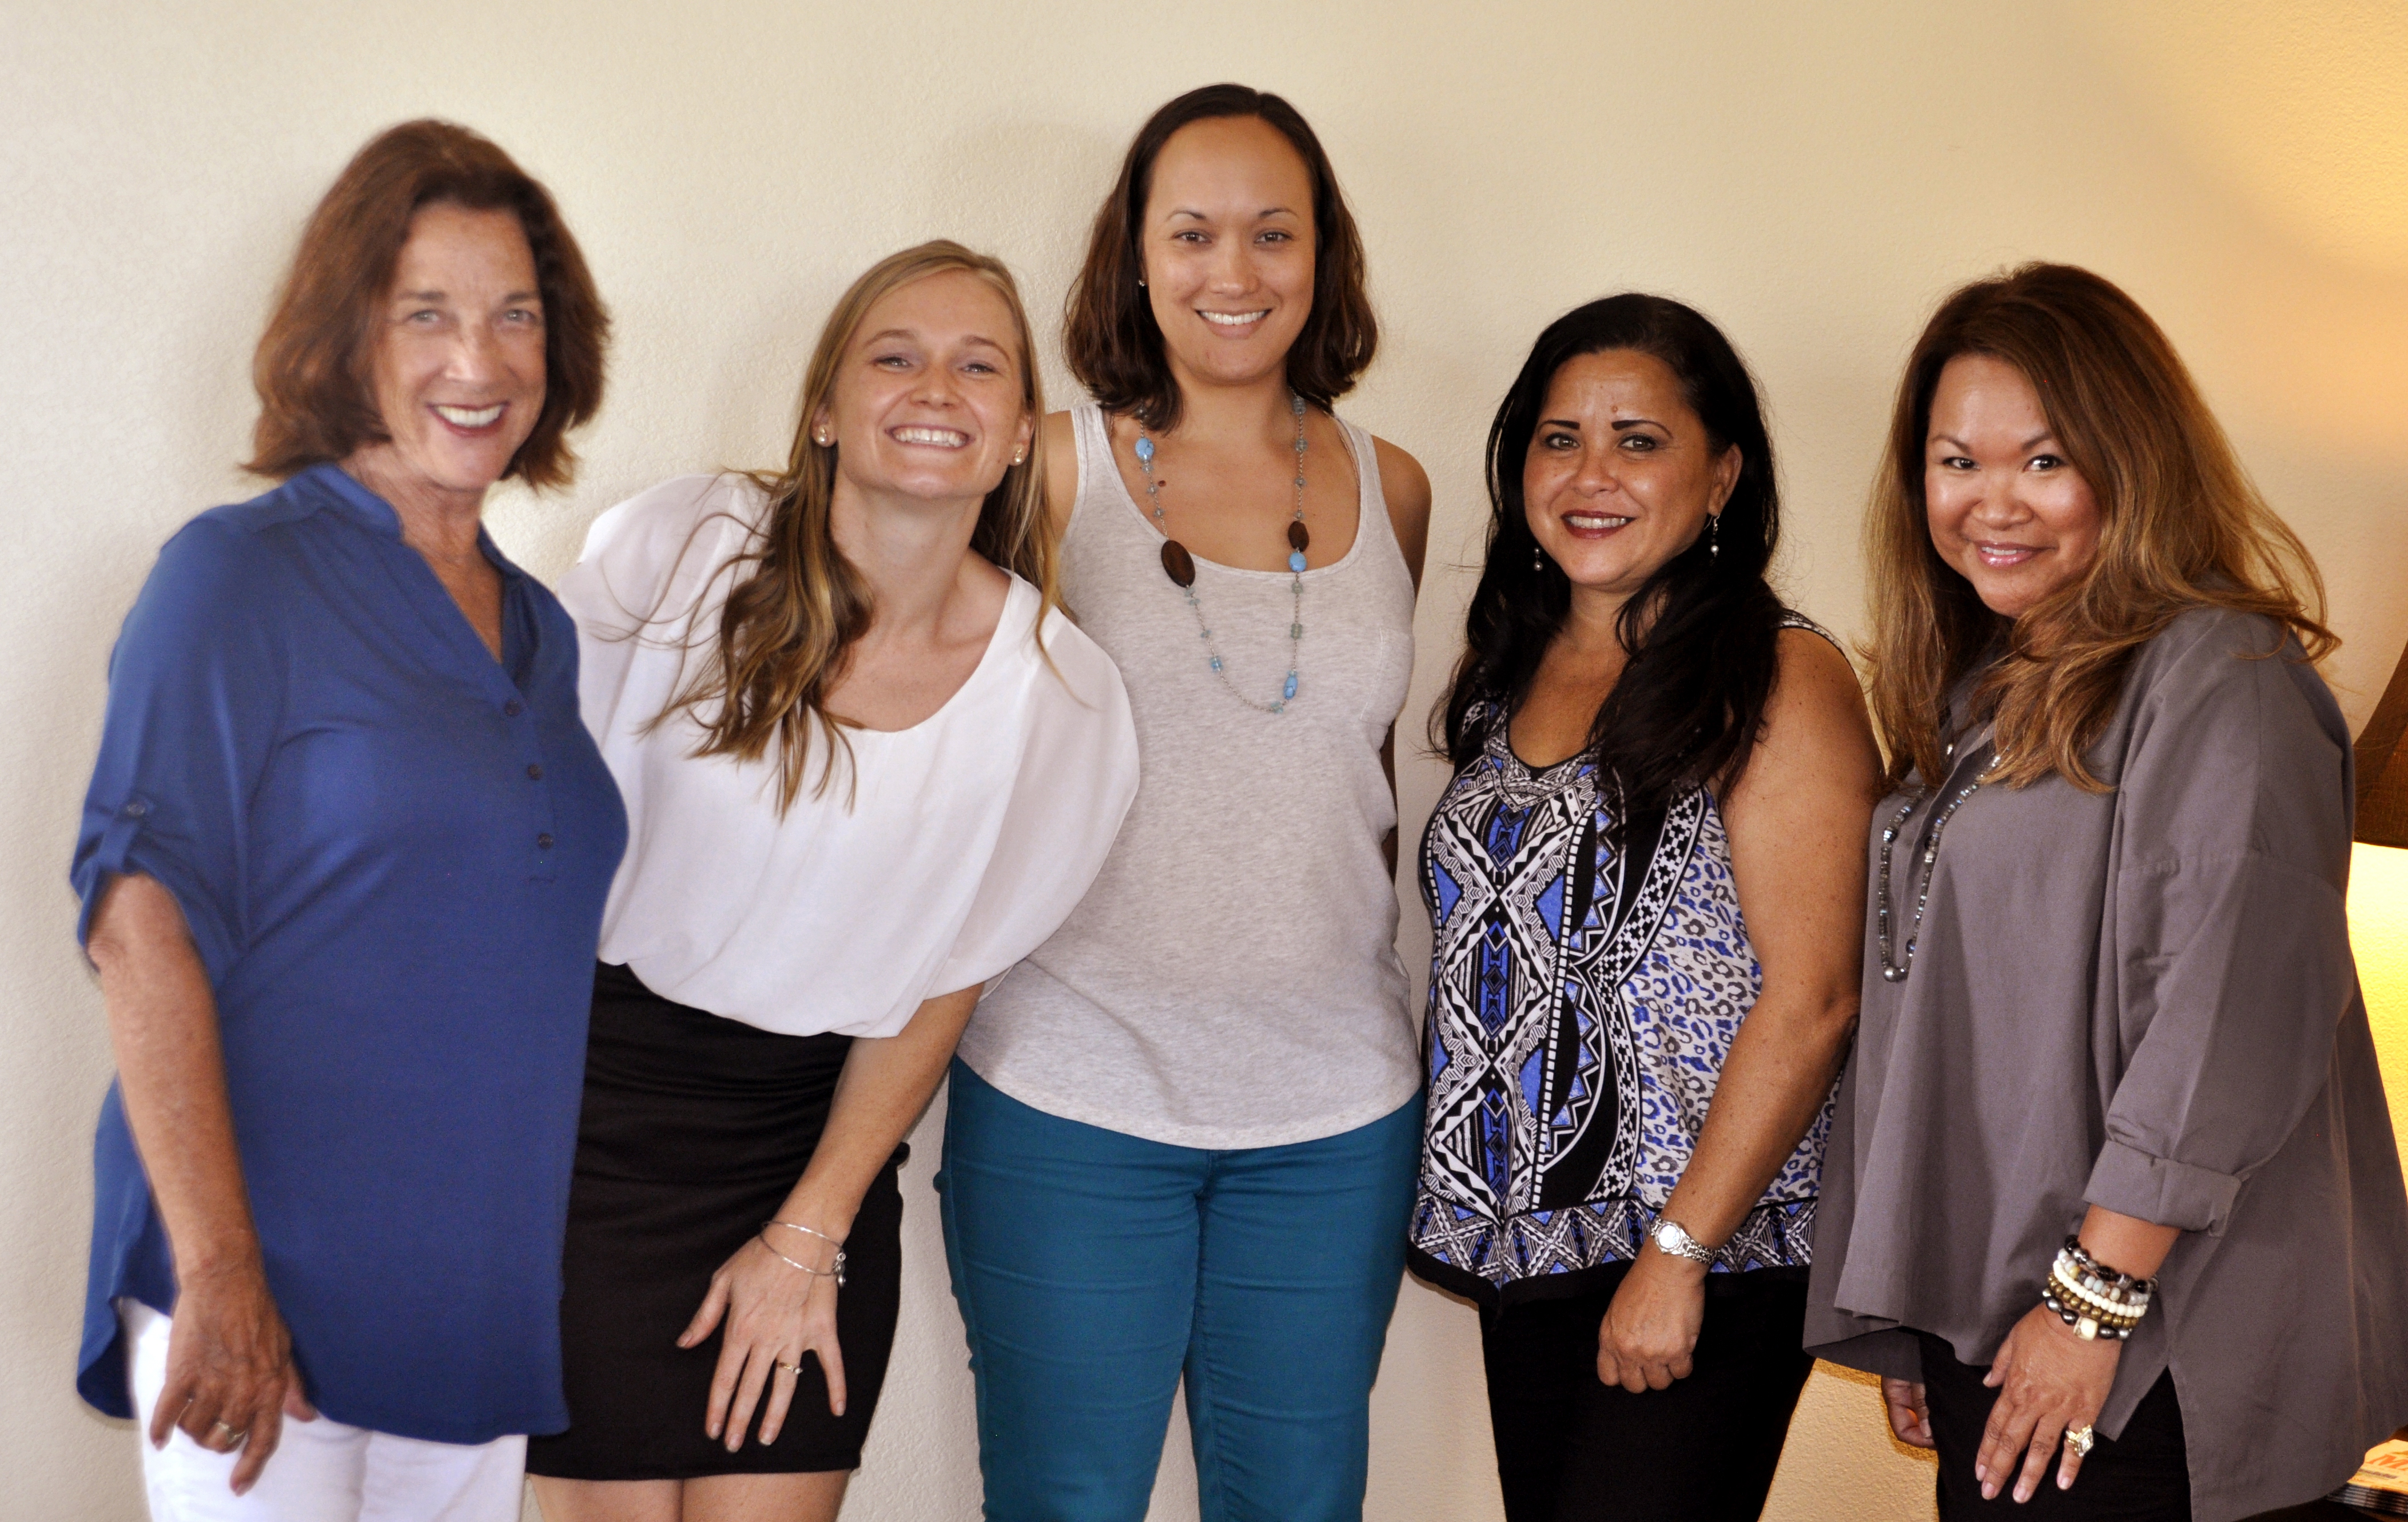 Summer 2014 session: ( left to right) Francesca Carey of Fabmac Homes, Danielle Miller of Miller Media Management, Elizabeth Tomoso of Momma Love Baby Maternity, Francine Fernandez of Sassy Things Maui and Jennifer Powell of Wailea Realty. 